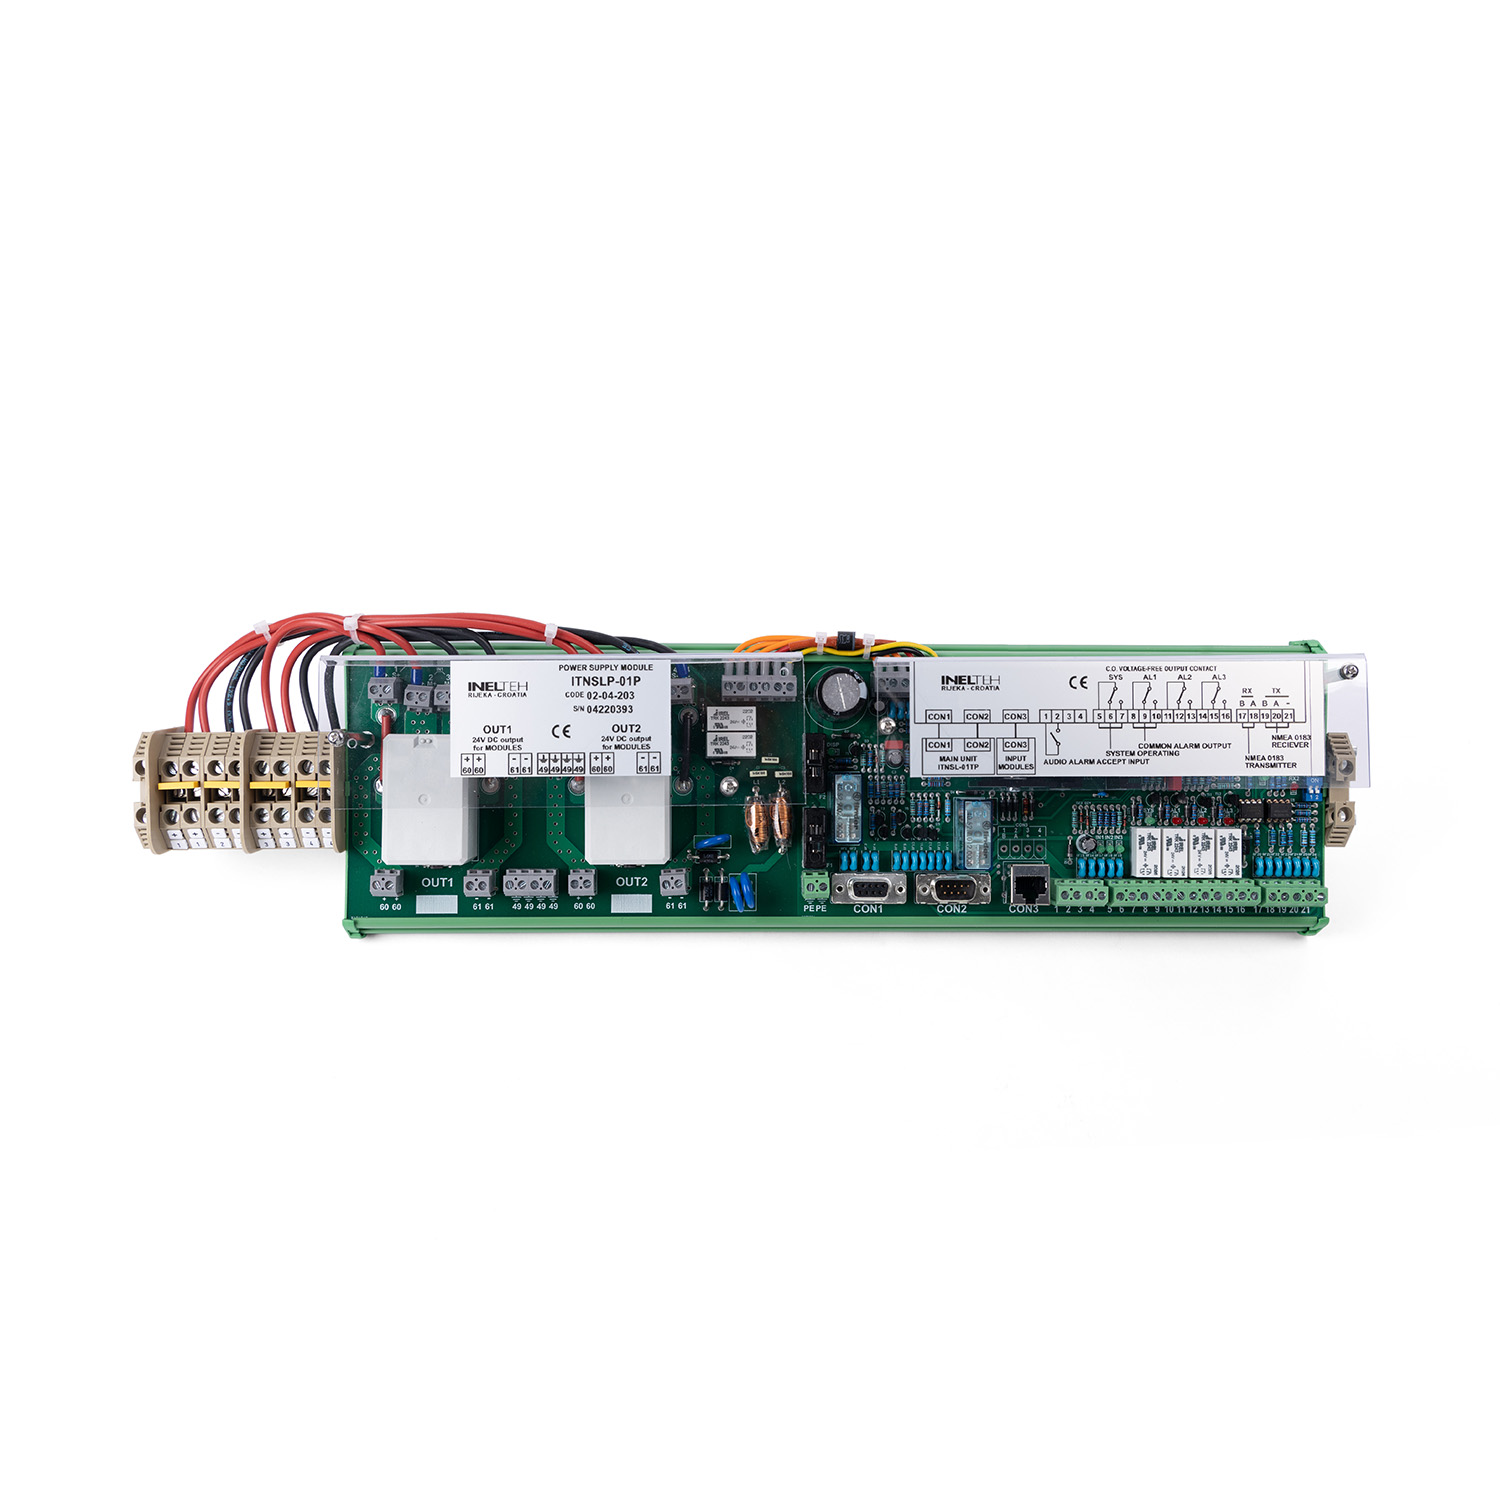 02-04-232 ITNSLP-01P Power supply module 230VAC-24VDC, with 2.5m for main unit connection